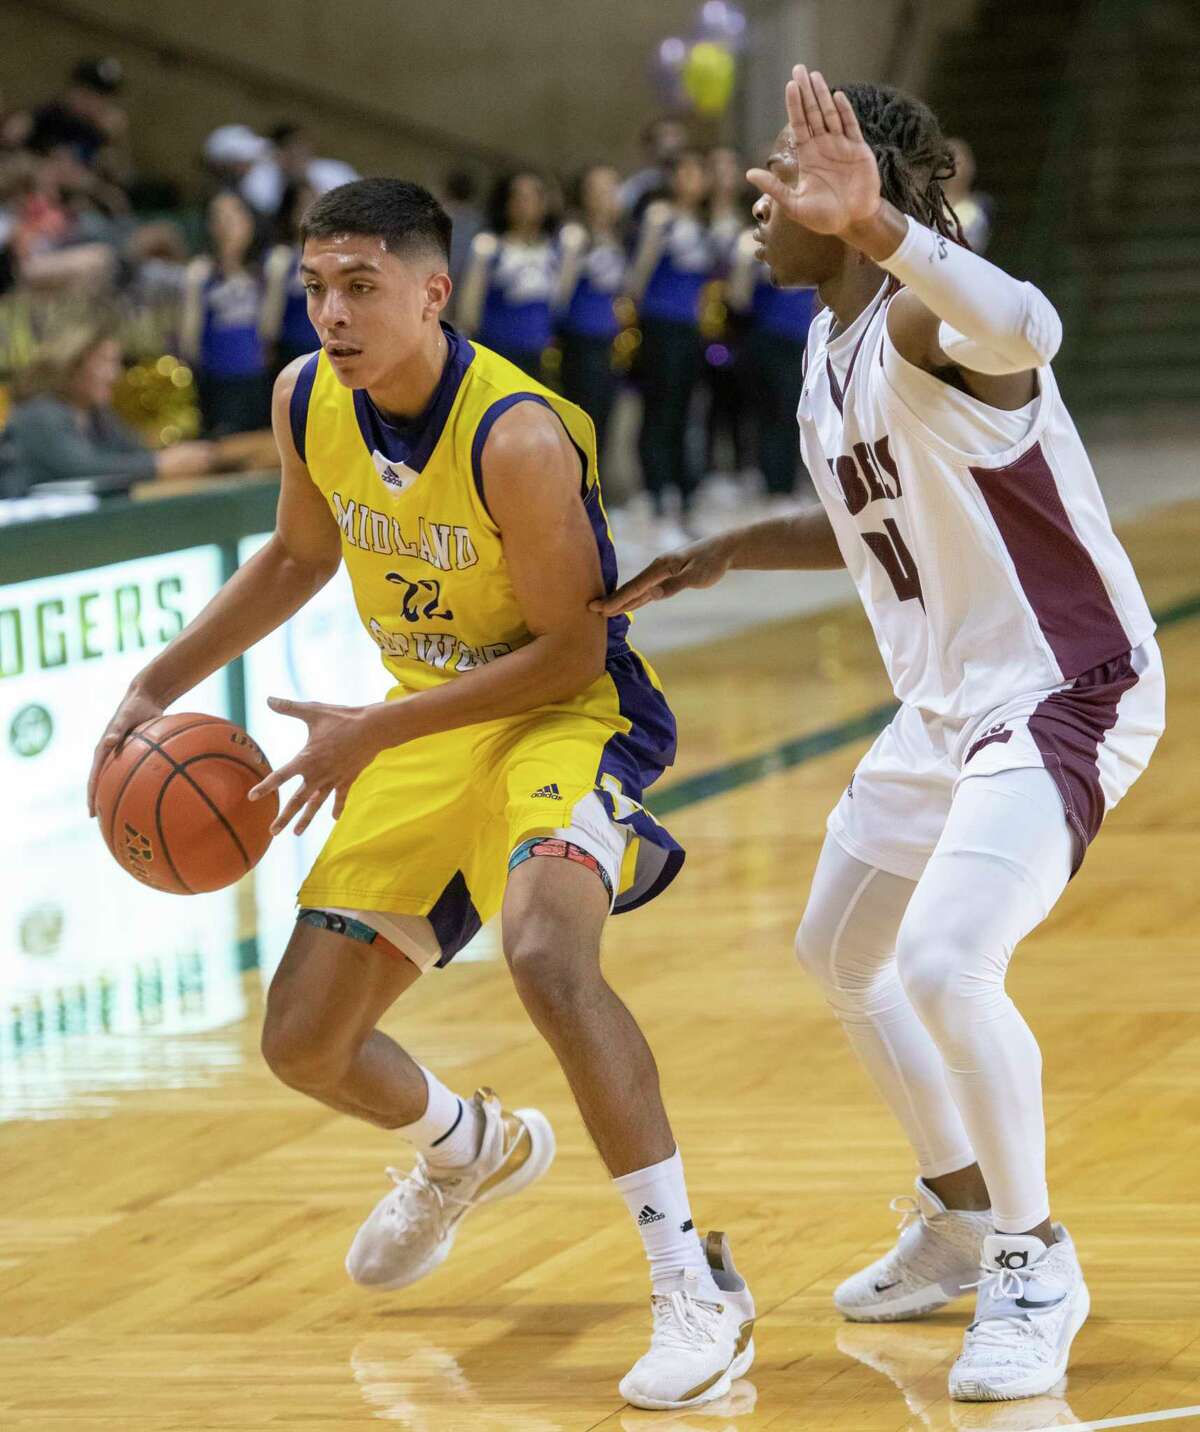 Midland High's Jaime Puentes dribbles the ball as Legacy High's Elijah Maxwell defends 02/01/2022 at the Chaparral Center. Tim Fischer/Reporter-Telegram